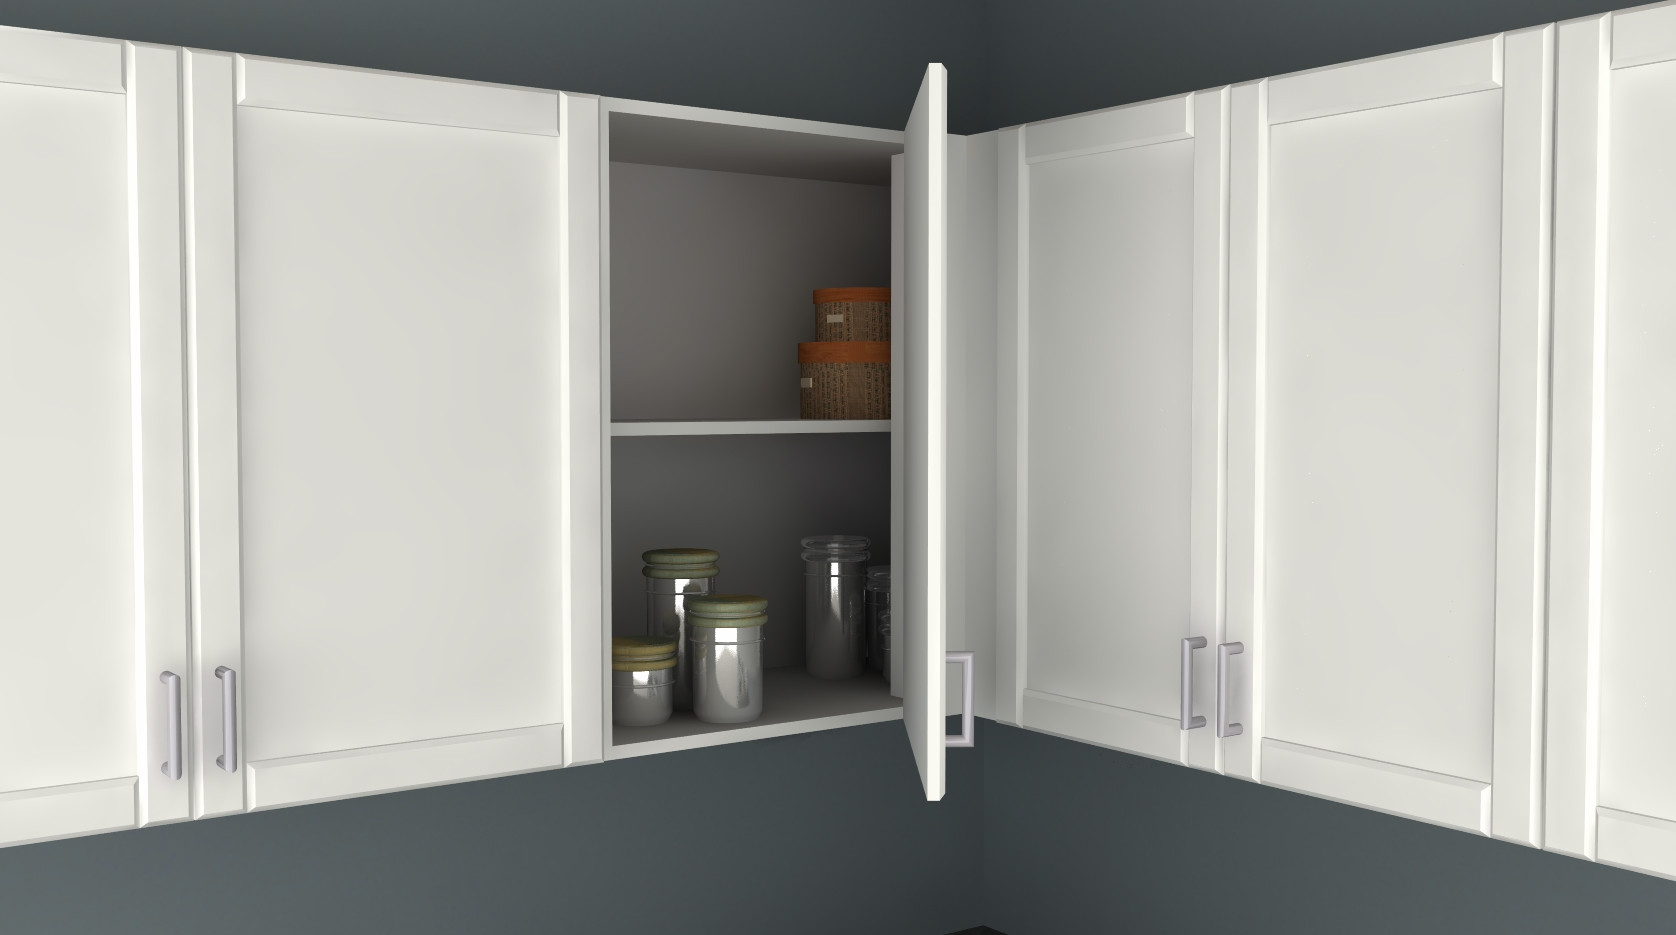 Kitchen Wall Units
 IKEA Kitchen Hack A Blind Corner Wall Cabinet Perfect for